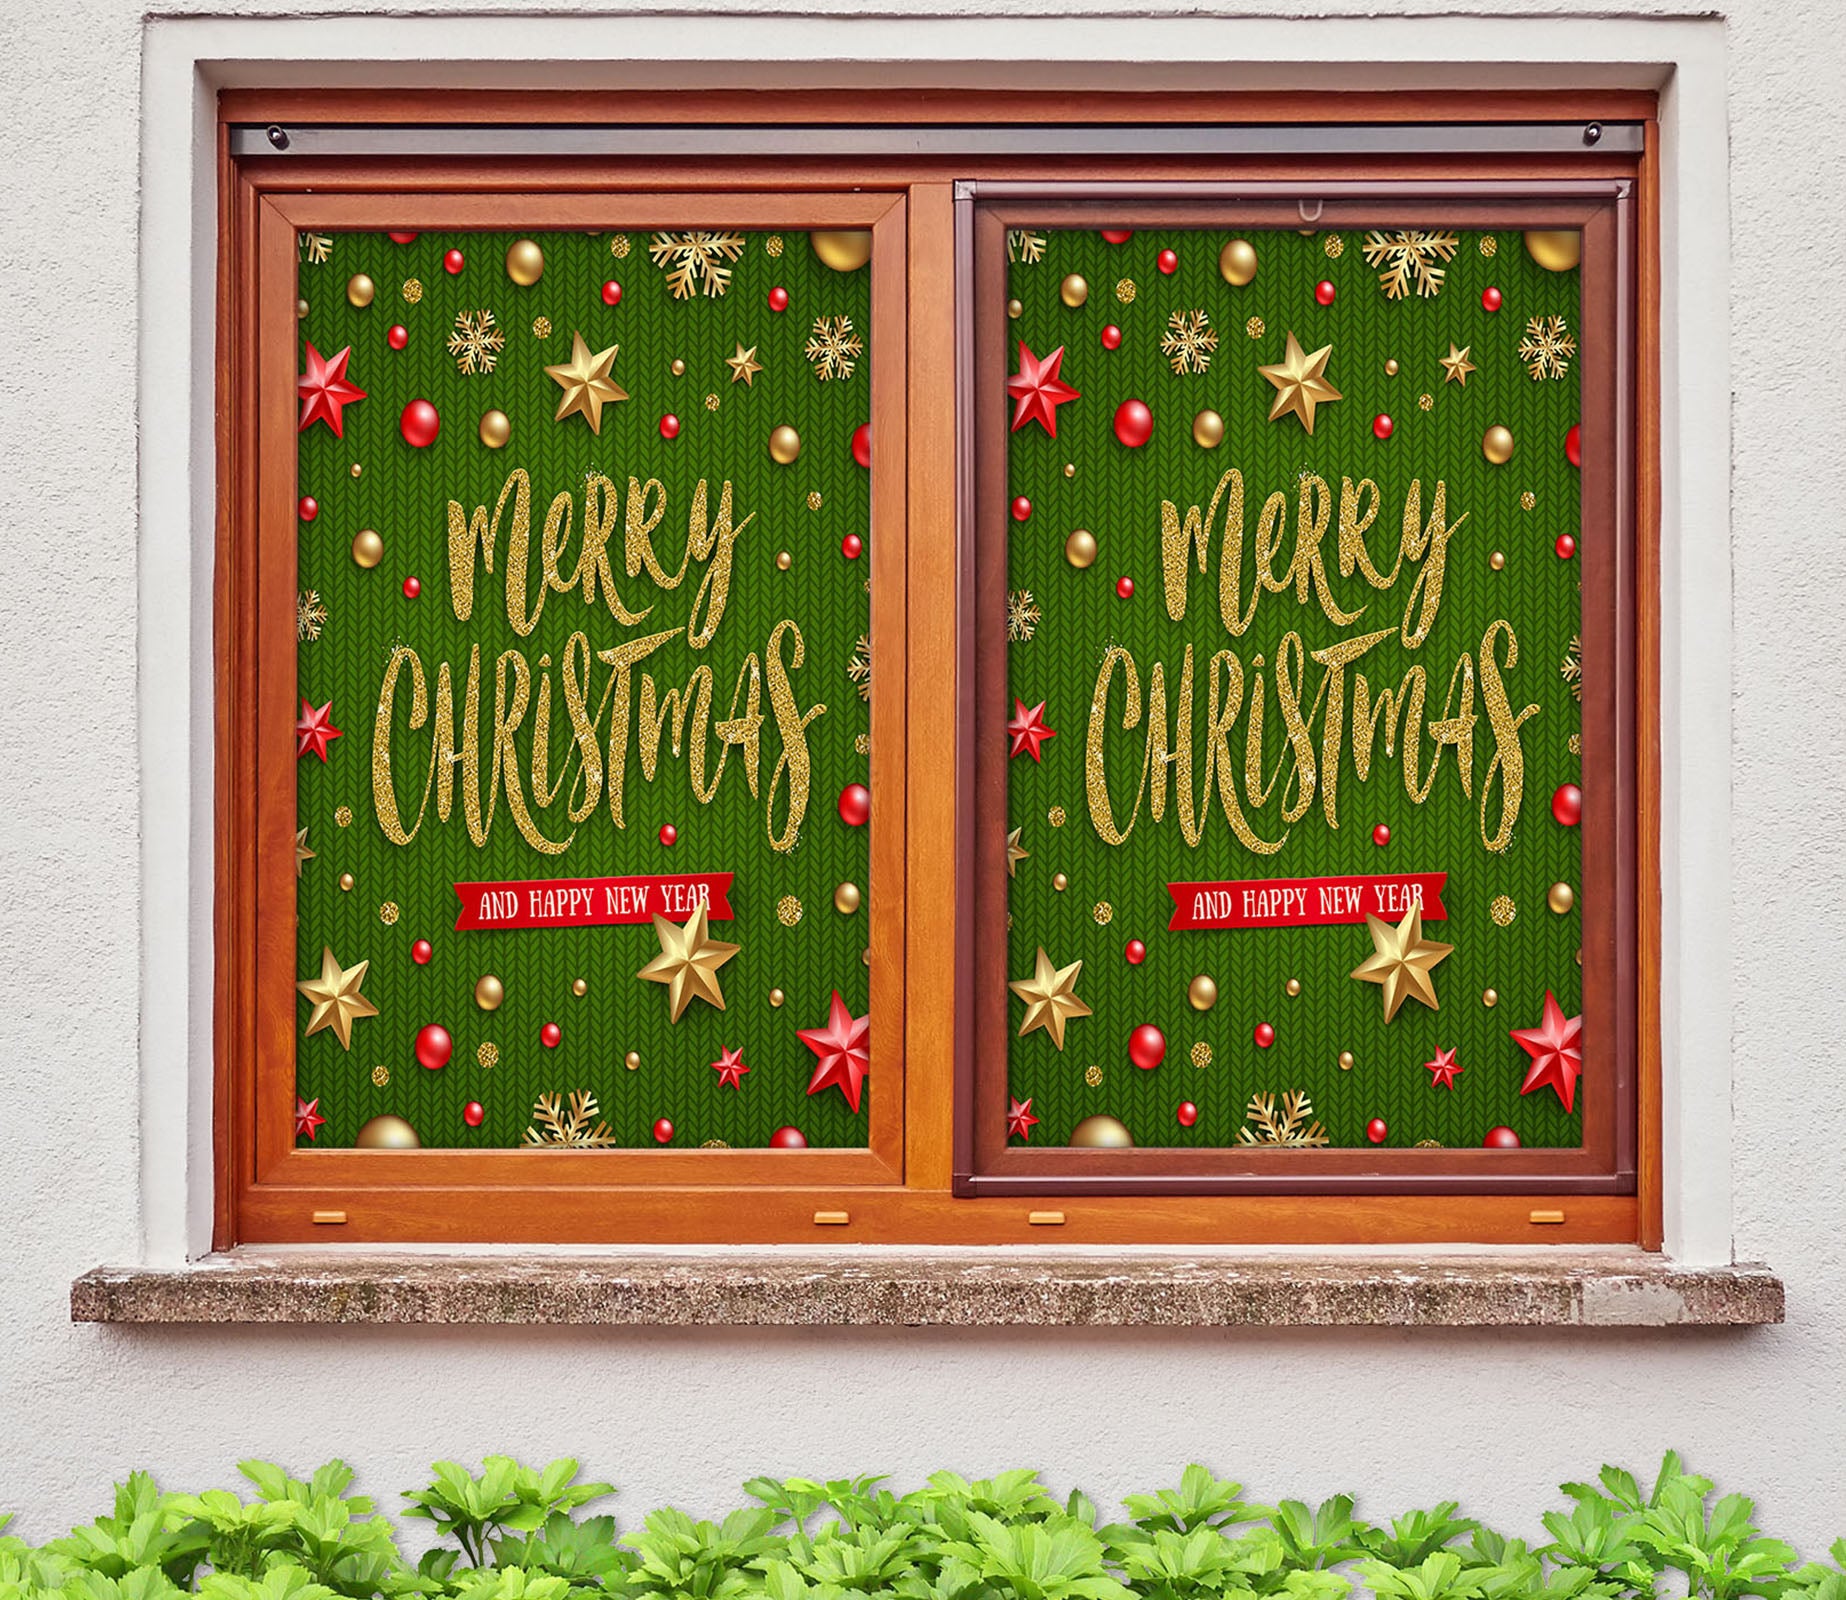 3D Merry Christmas 31053 Christmas Window Film Print Sticker Cling Stained Glass Xmas